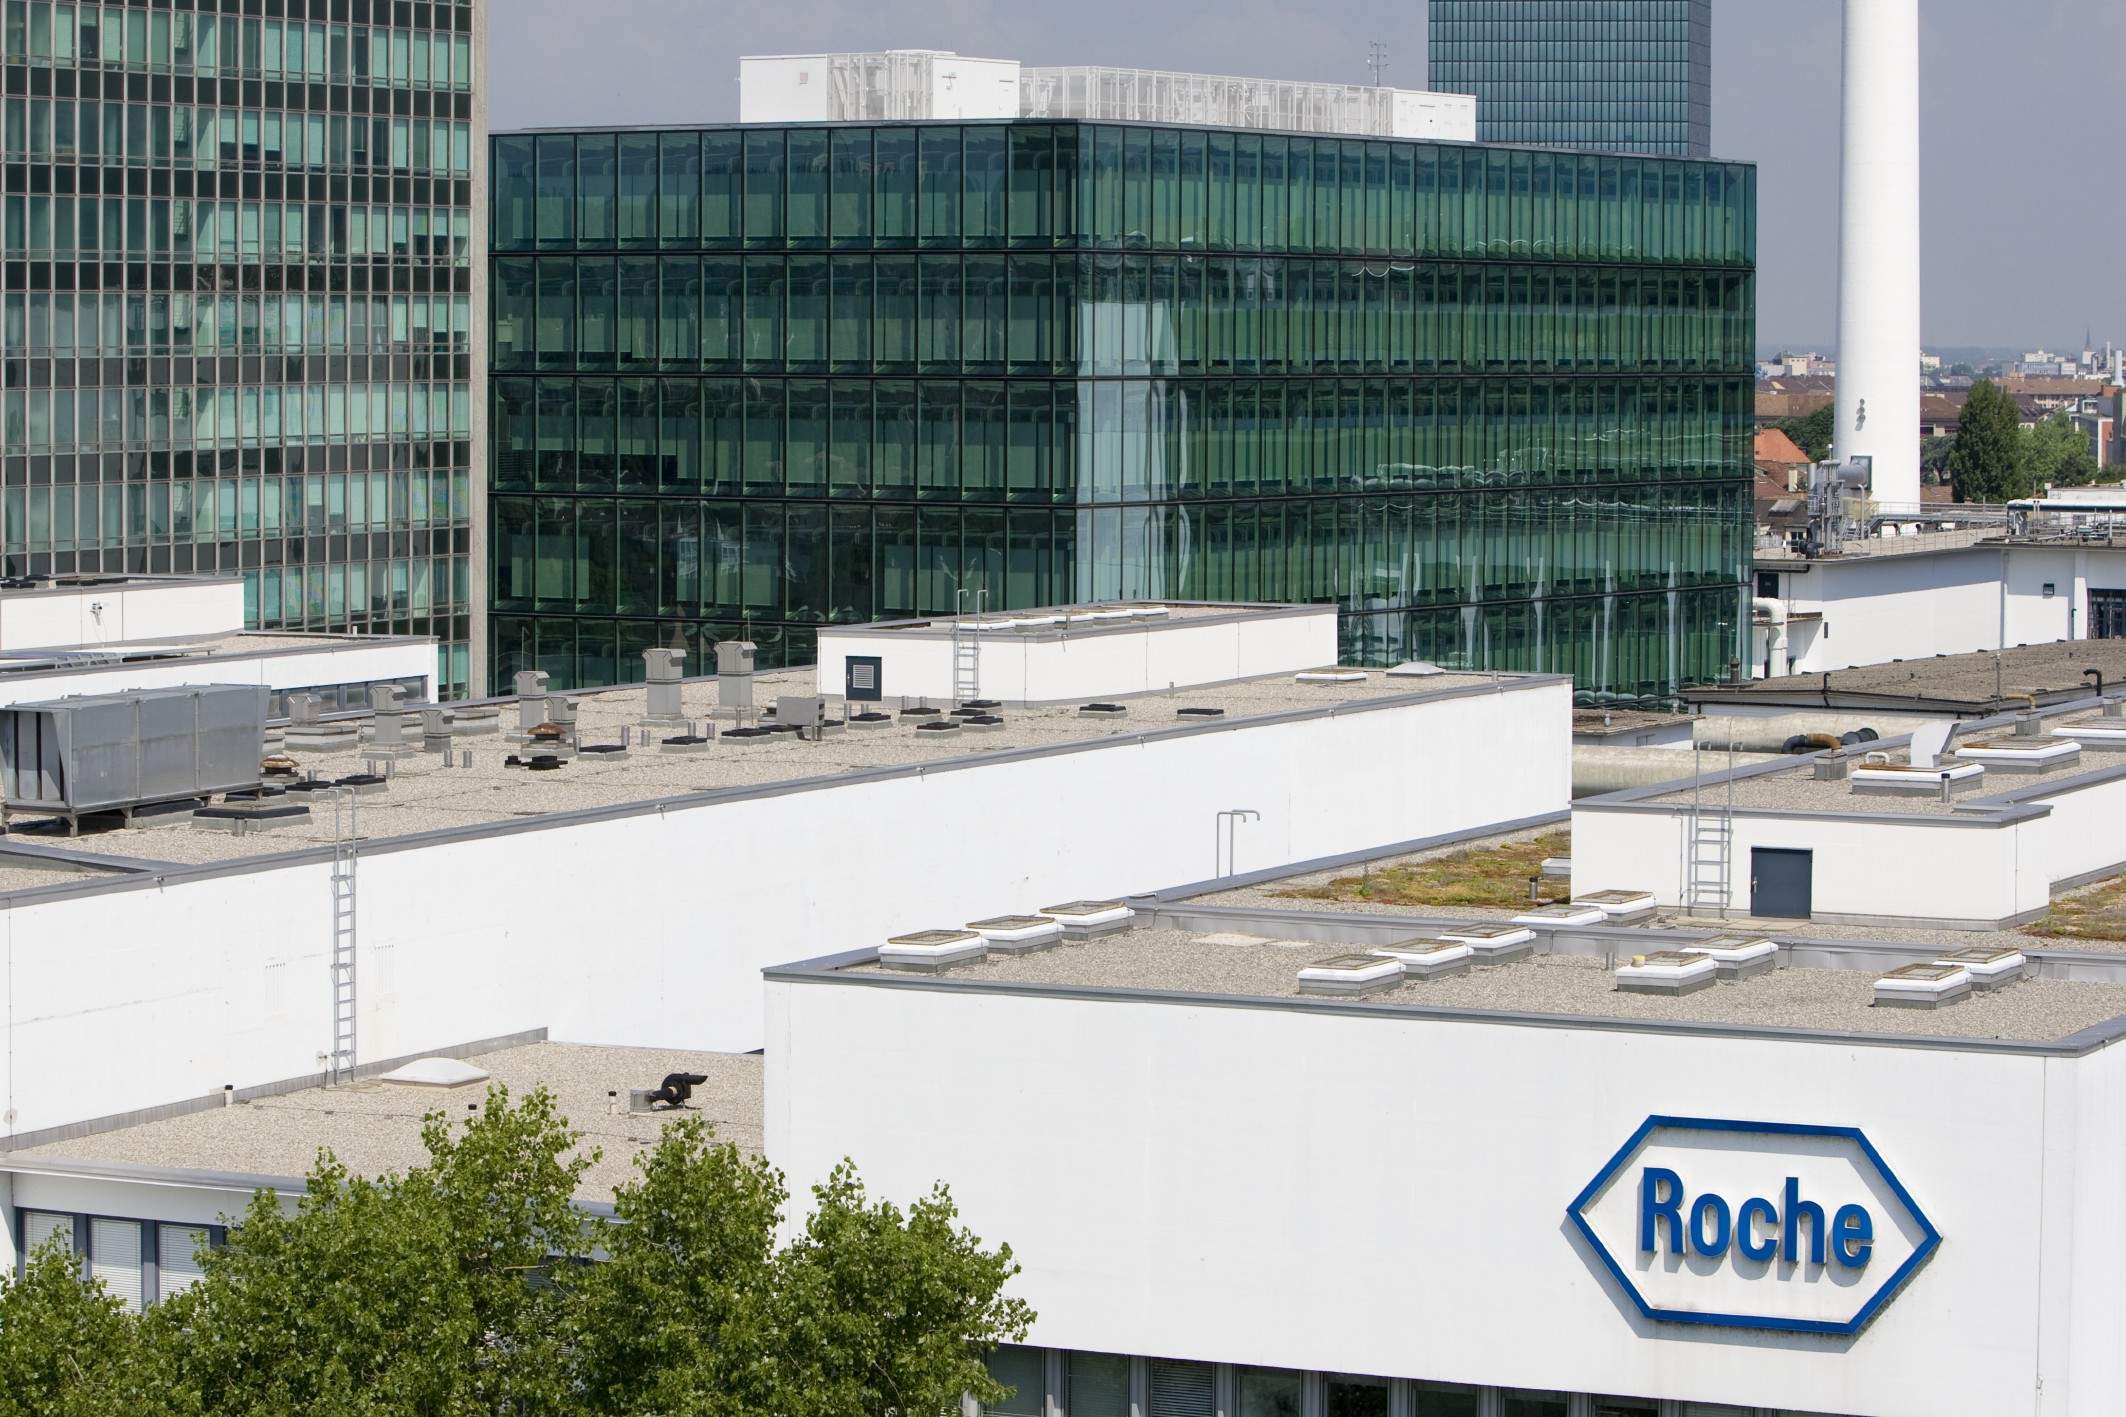 Roche to buy remaining stake in Foundation Medicine for $2.4bn